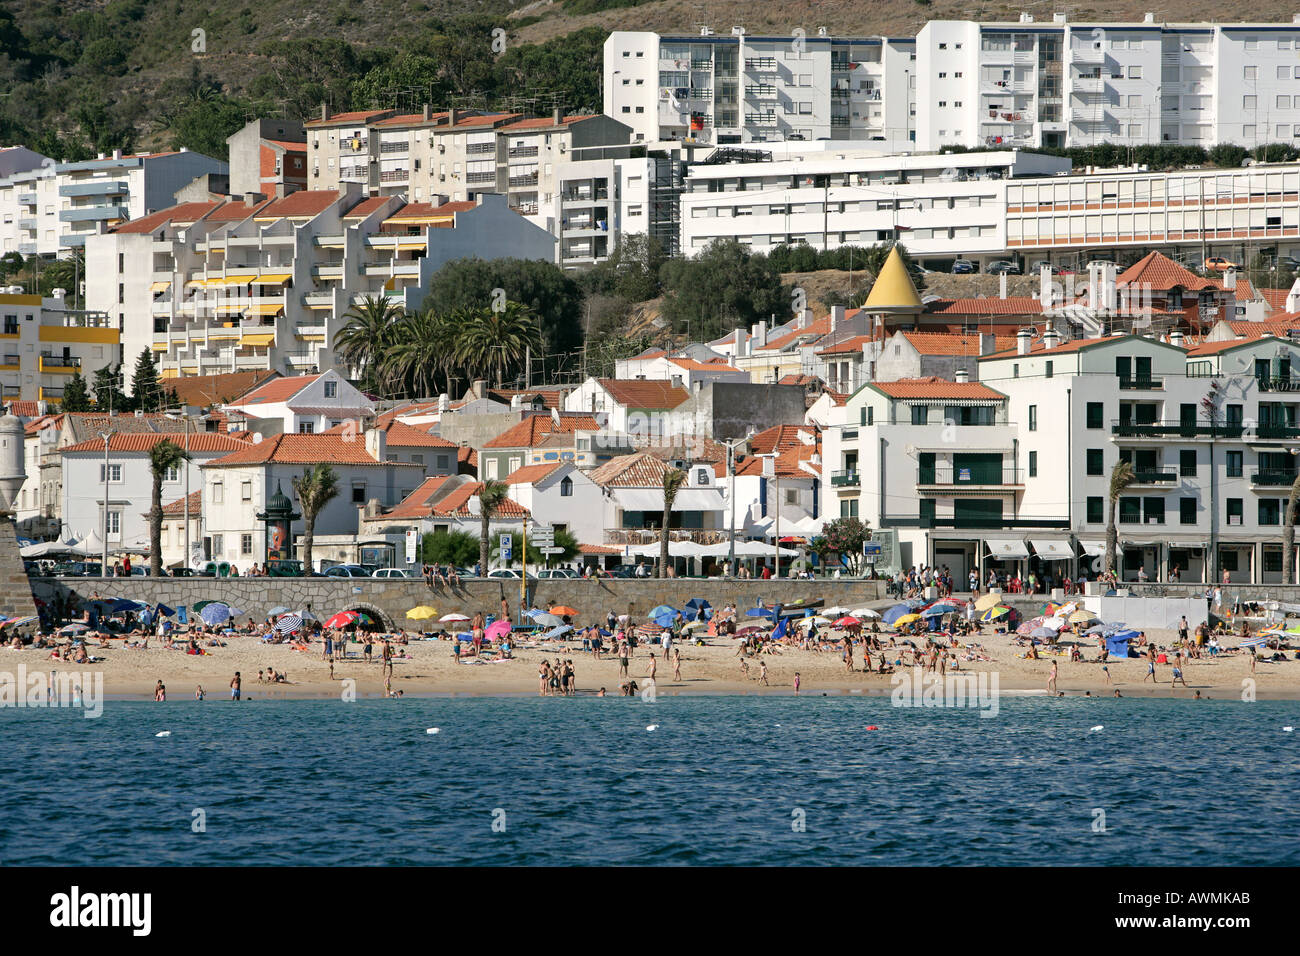 Typical overbuilding on the beaches of Europe Here bathers crowd the beach in Sesimbra Portugal Stock Photo